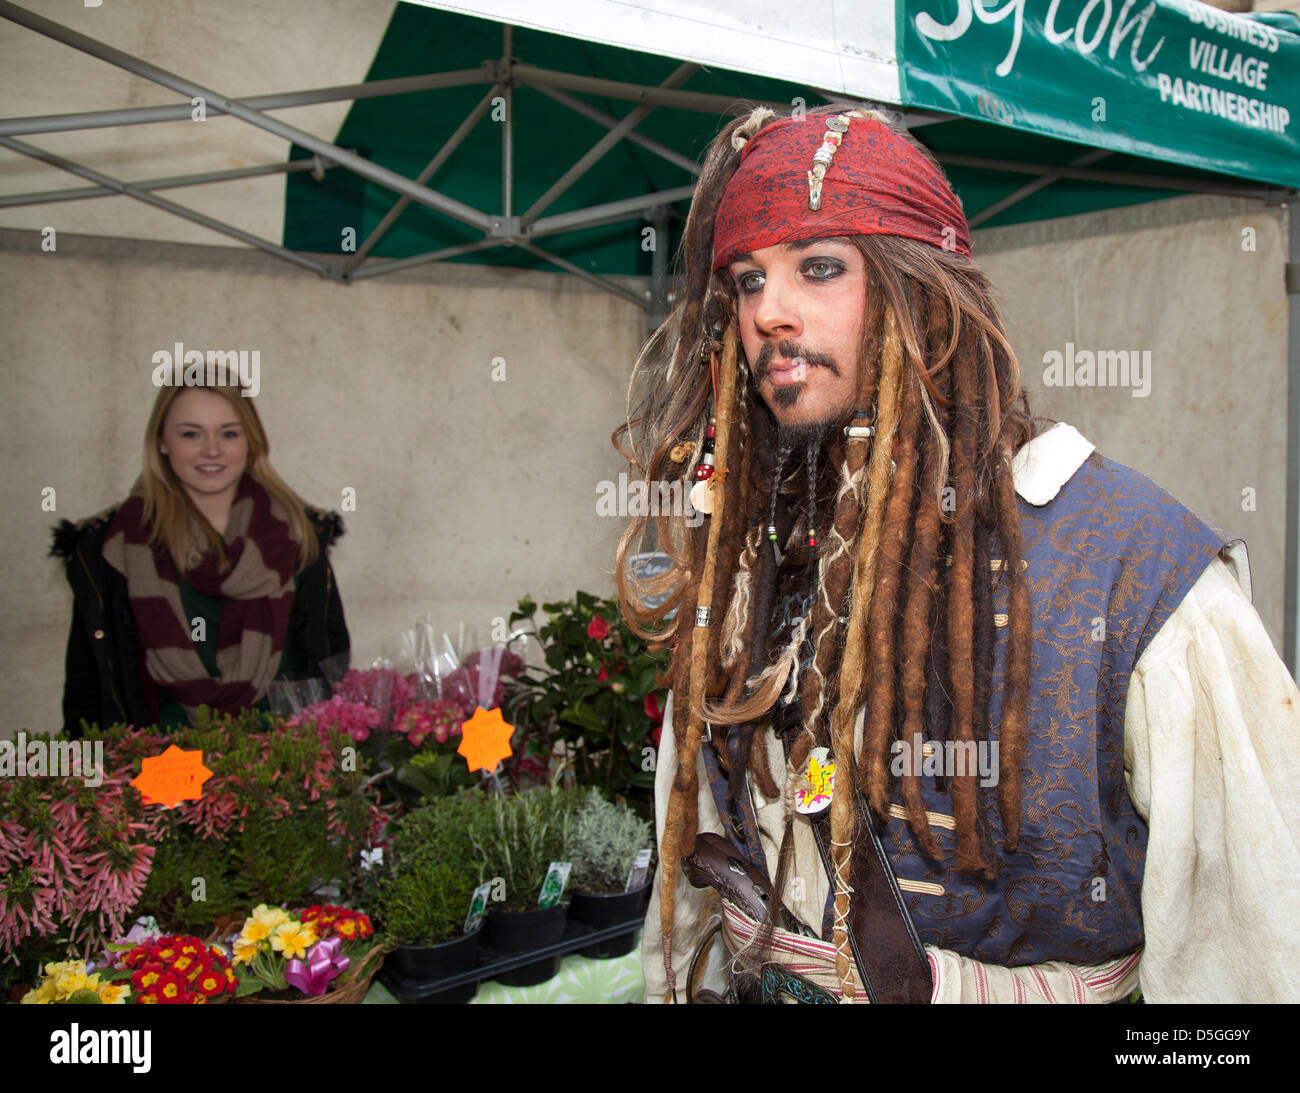 Pirates of the Caribbean Lookalike; Southport, Merseyside, UK. 2nd April, 2013.  John Brook, (MR) 32 years old with beard & long hair, at the new outdoor market, an alfresco venture, in  King Street.  The launch celebrated Captain Jack Sparrow. Stock Photo